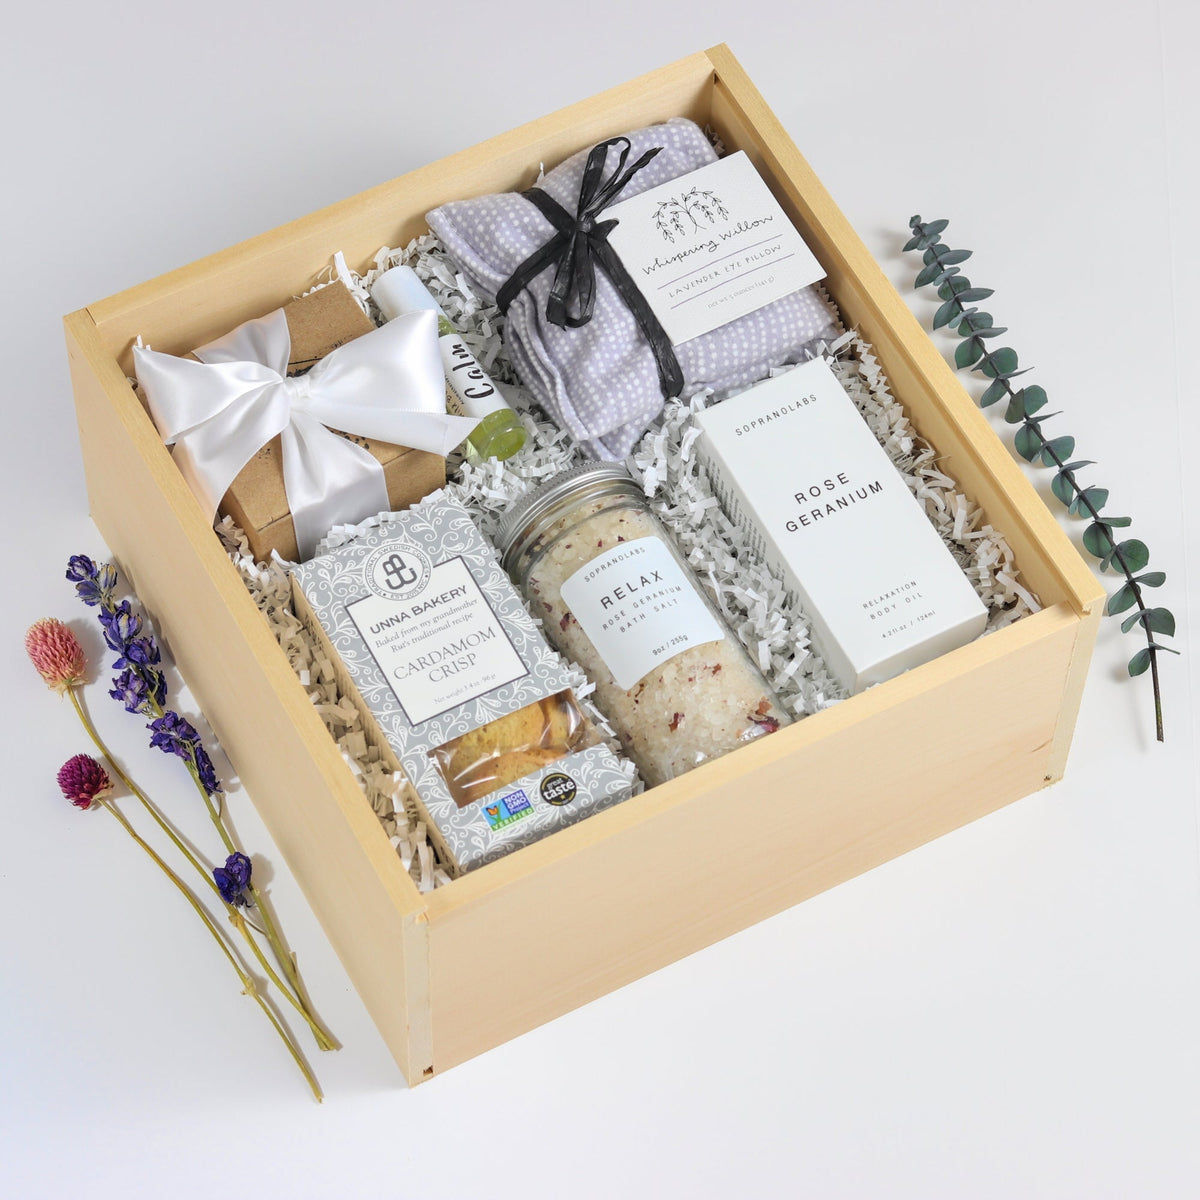 relaxation gift box